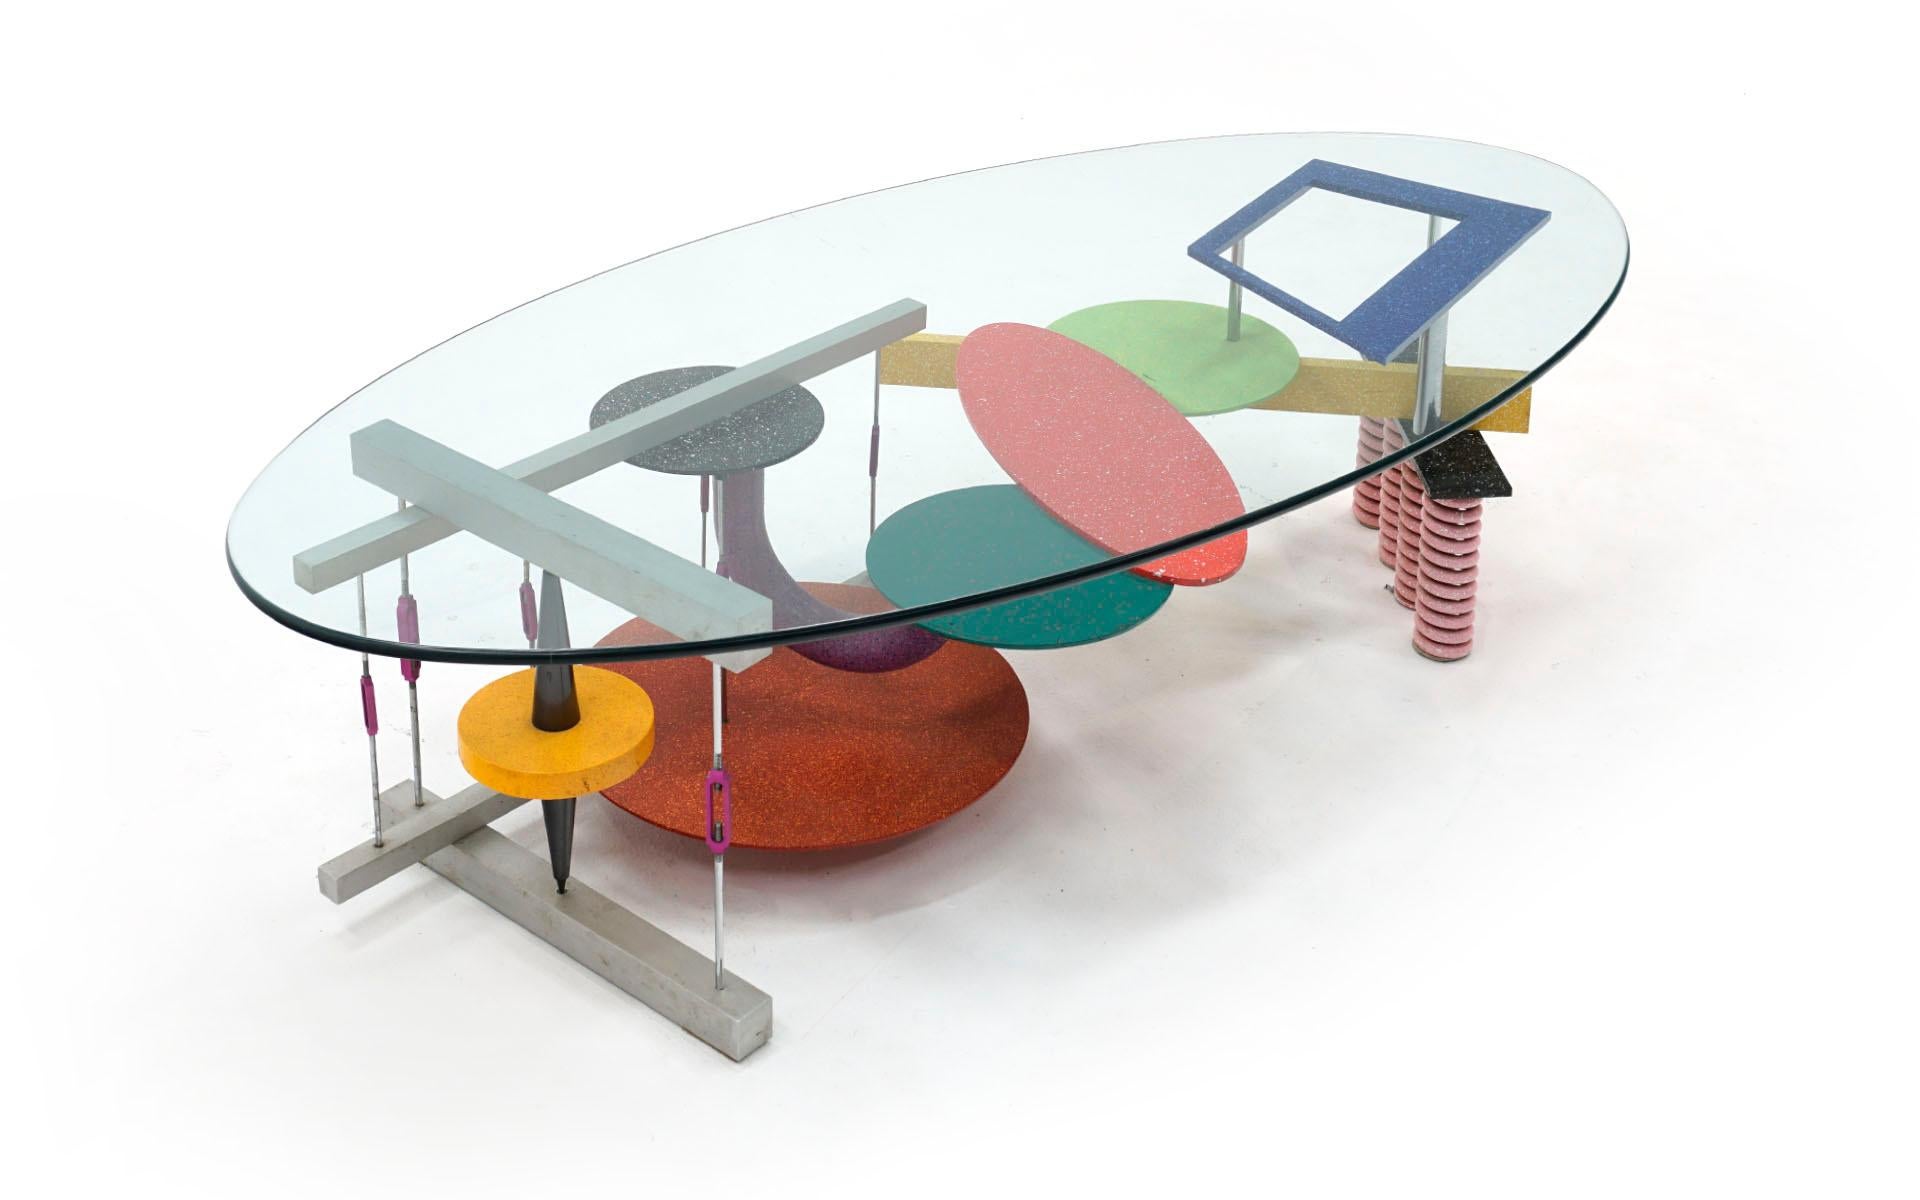 Post Modern coffee table by Peter Shire, Los Angeles, early 1980s. Multi color enameled steel and aluminum base with the original oval glass top. No chips or significant scratches to the top. The base is in very good condition with few if any signs